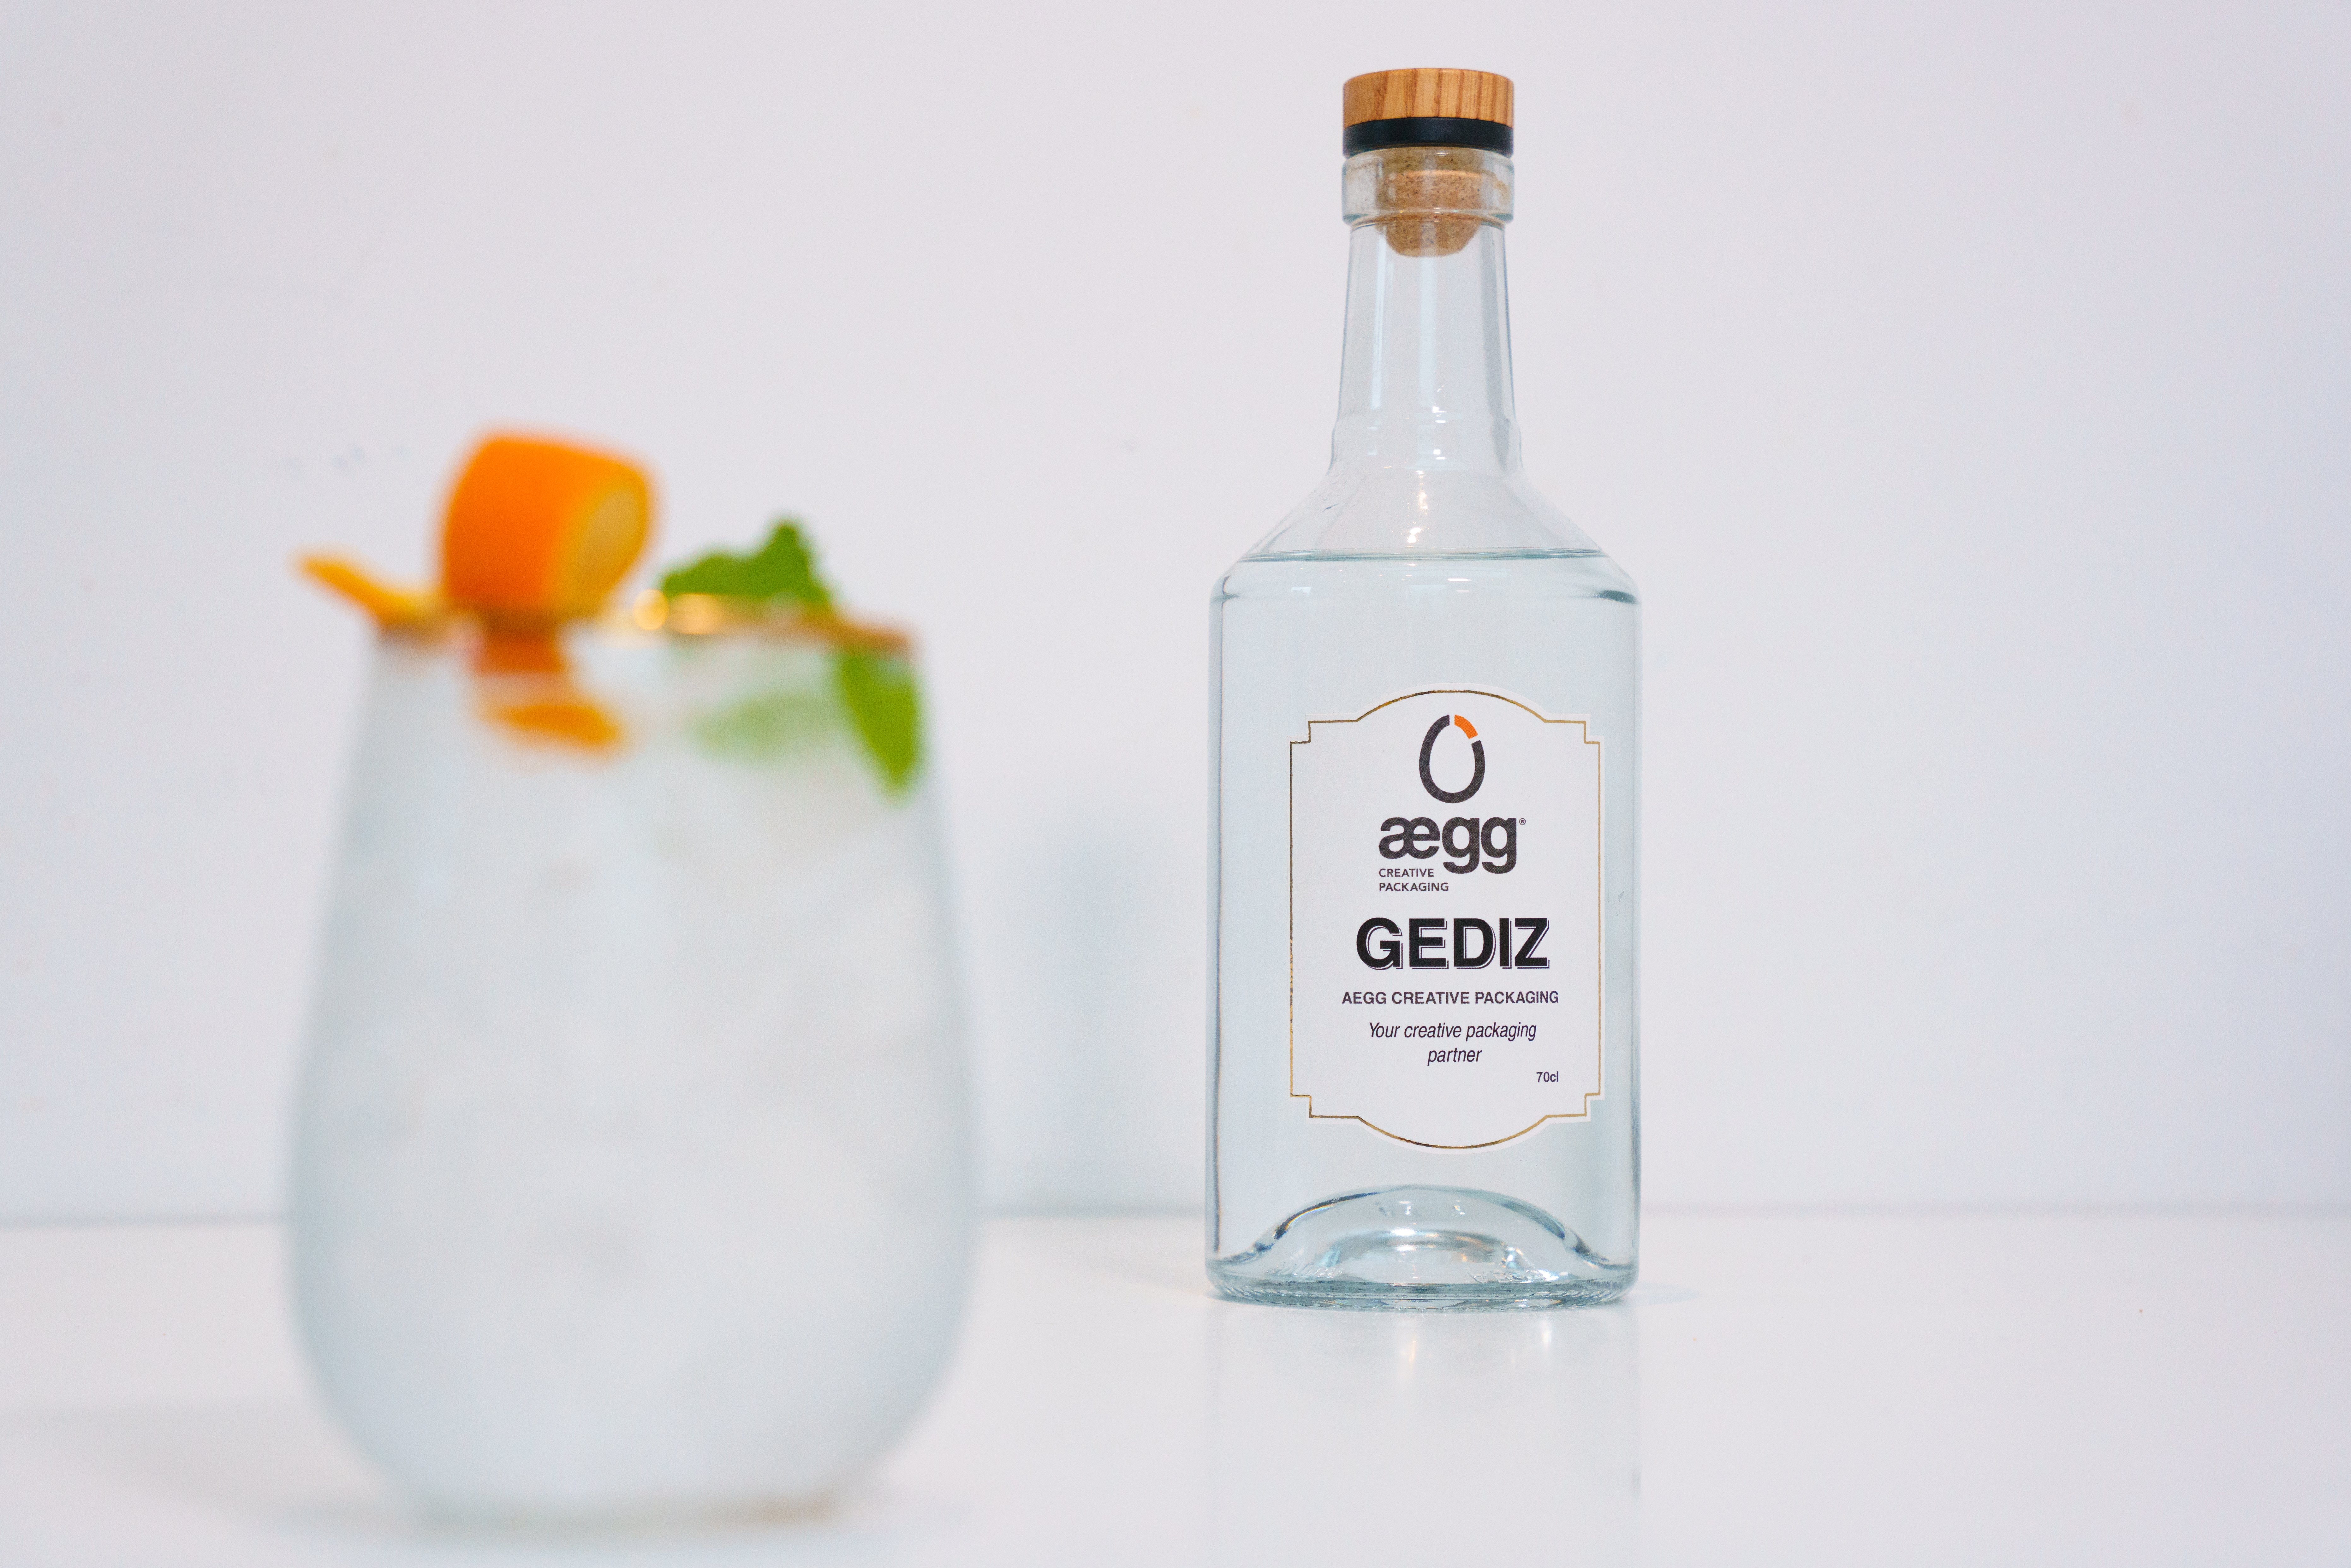 The Gediz glass spirit bottle, available exclusively in the UK from Aegg Creative Packaging